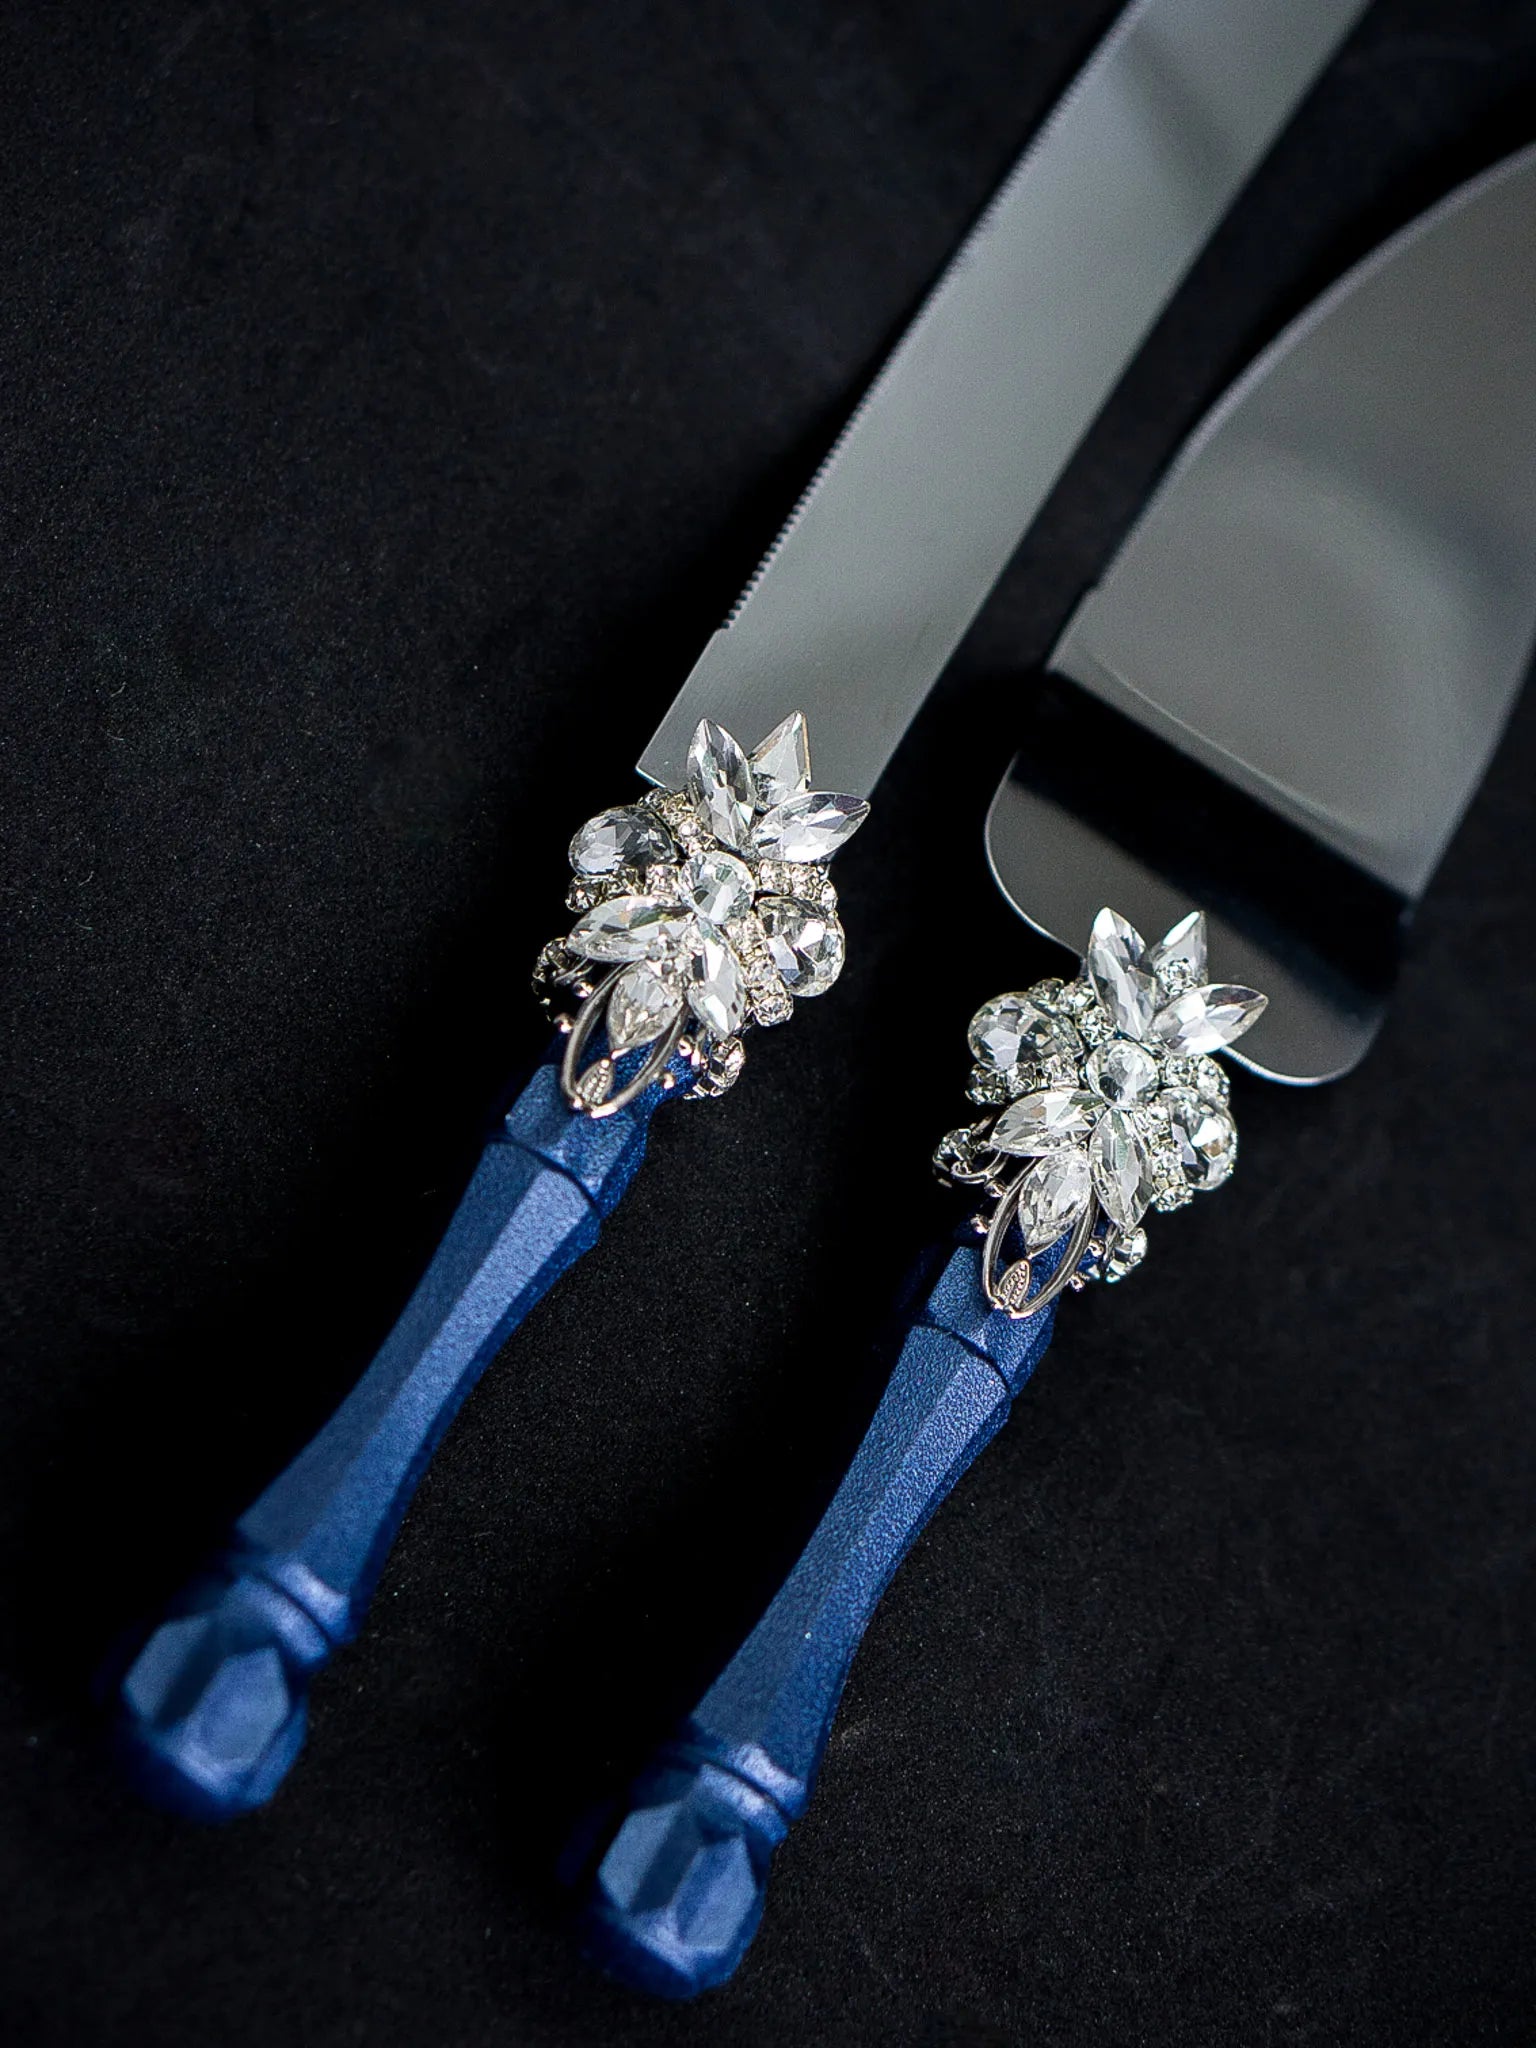 Stylish Silver and Navy Blue Crystals Wedding Glassware and Cake Knife Set